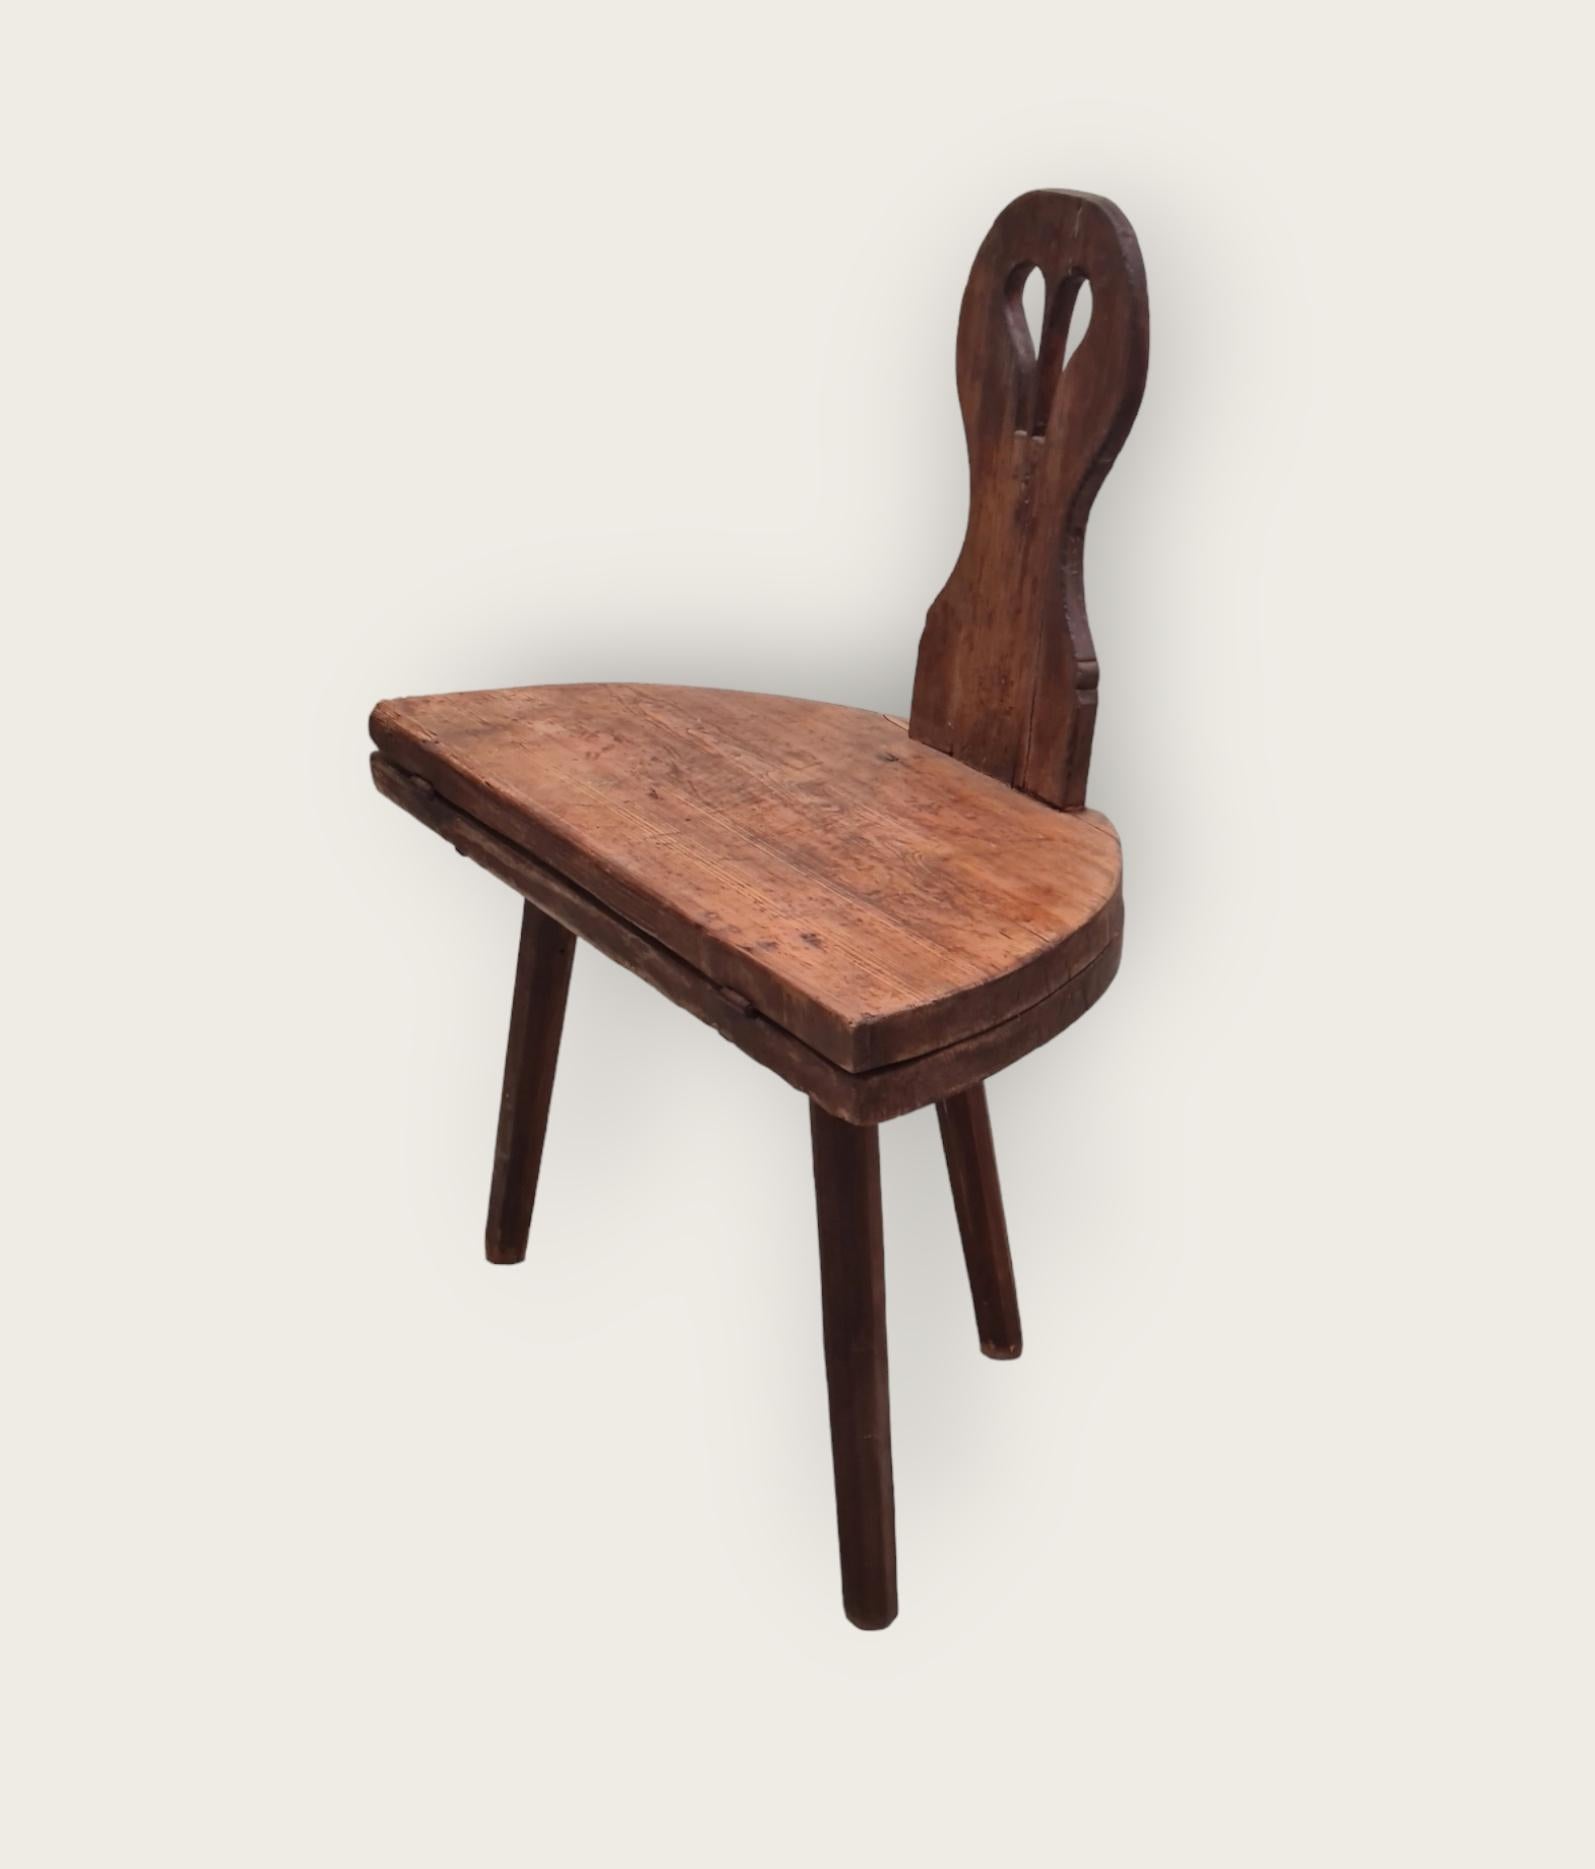 A lovely unique item that will certainly start many conversations in whichever space it ends up in. A Finnish Folk Art low table that can be folded into a chair. Or is it a chair that can be opened up into a coffee table? You and your guests can